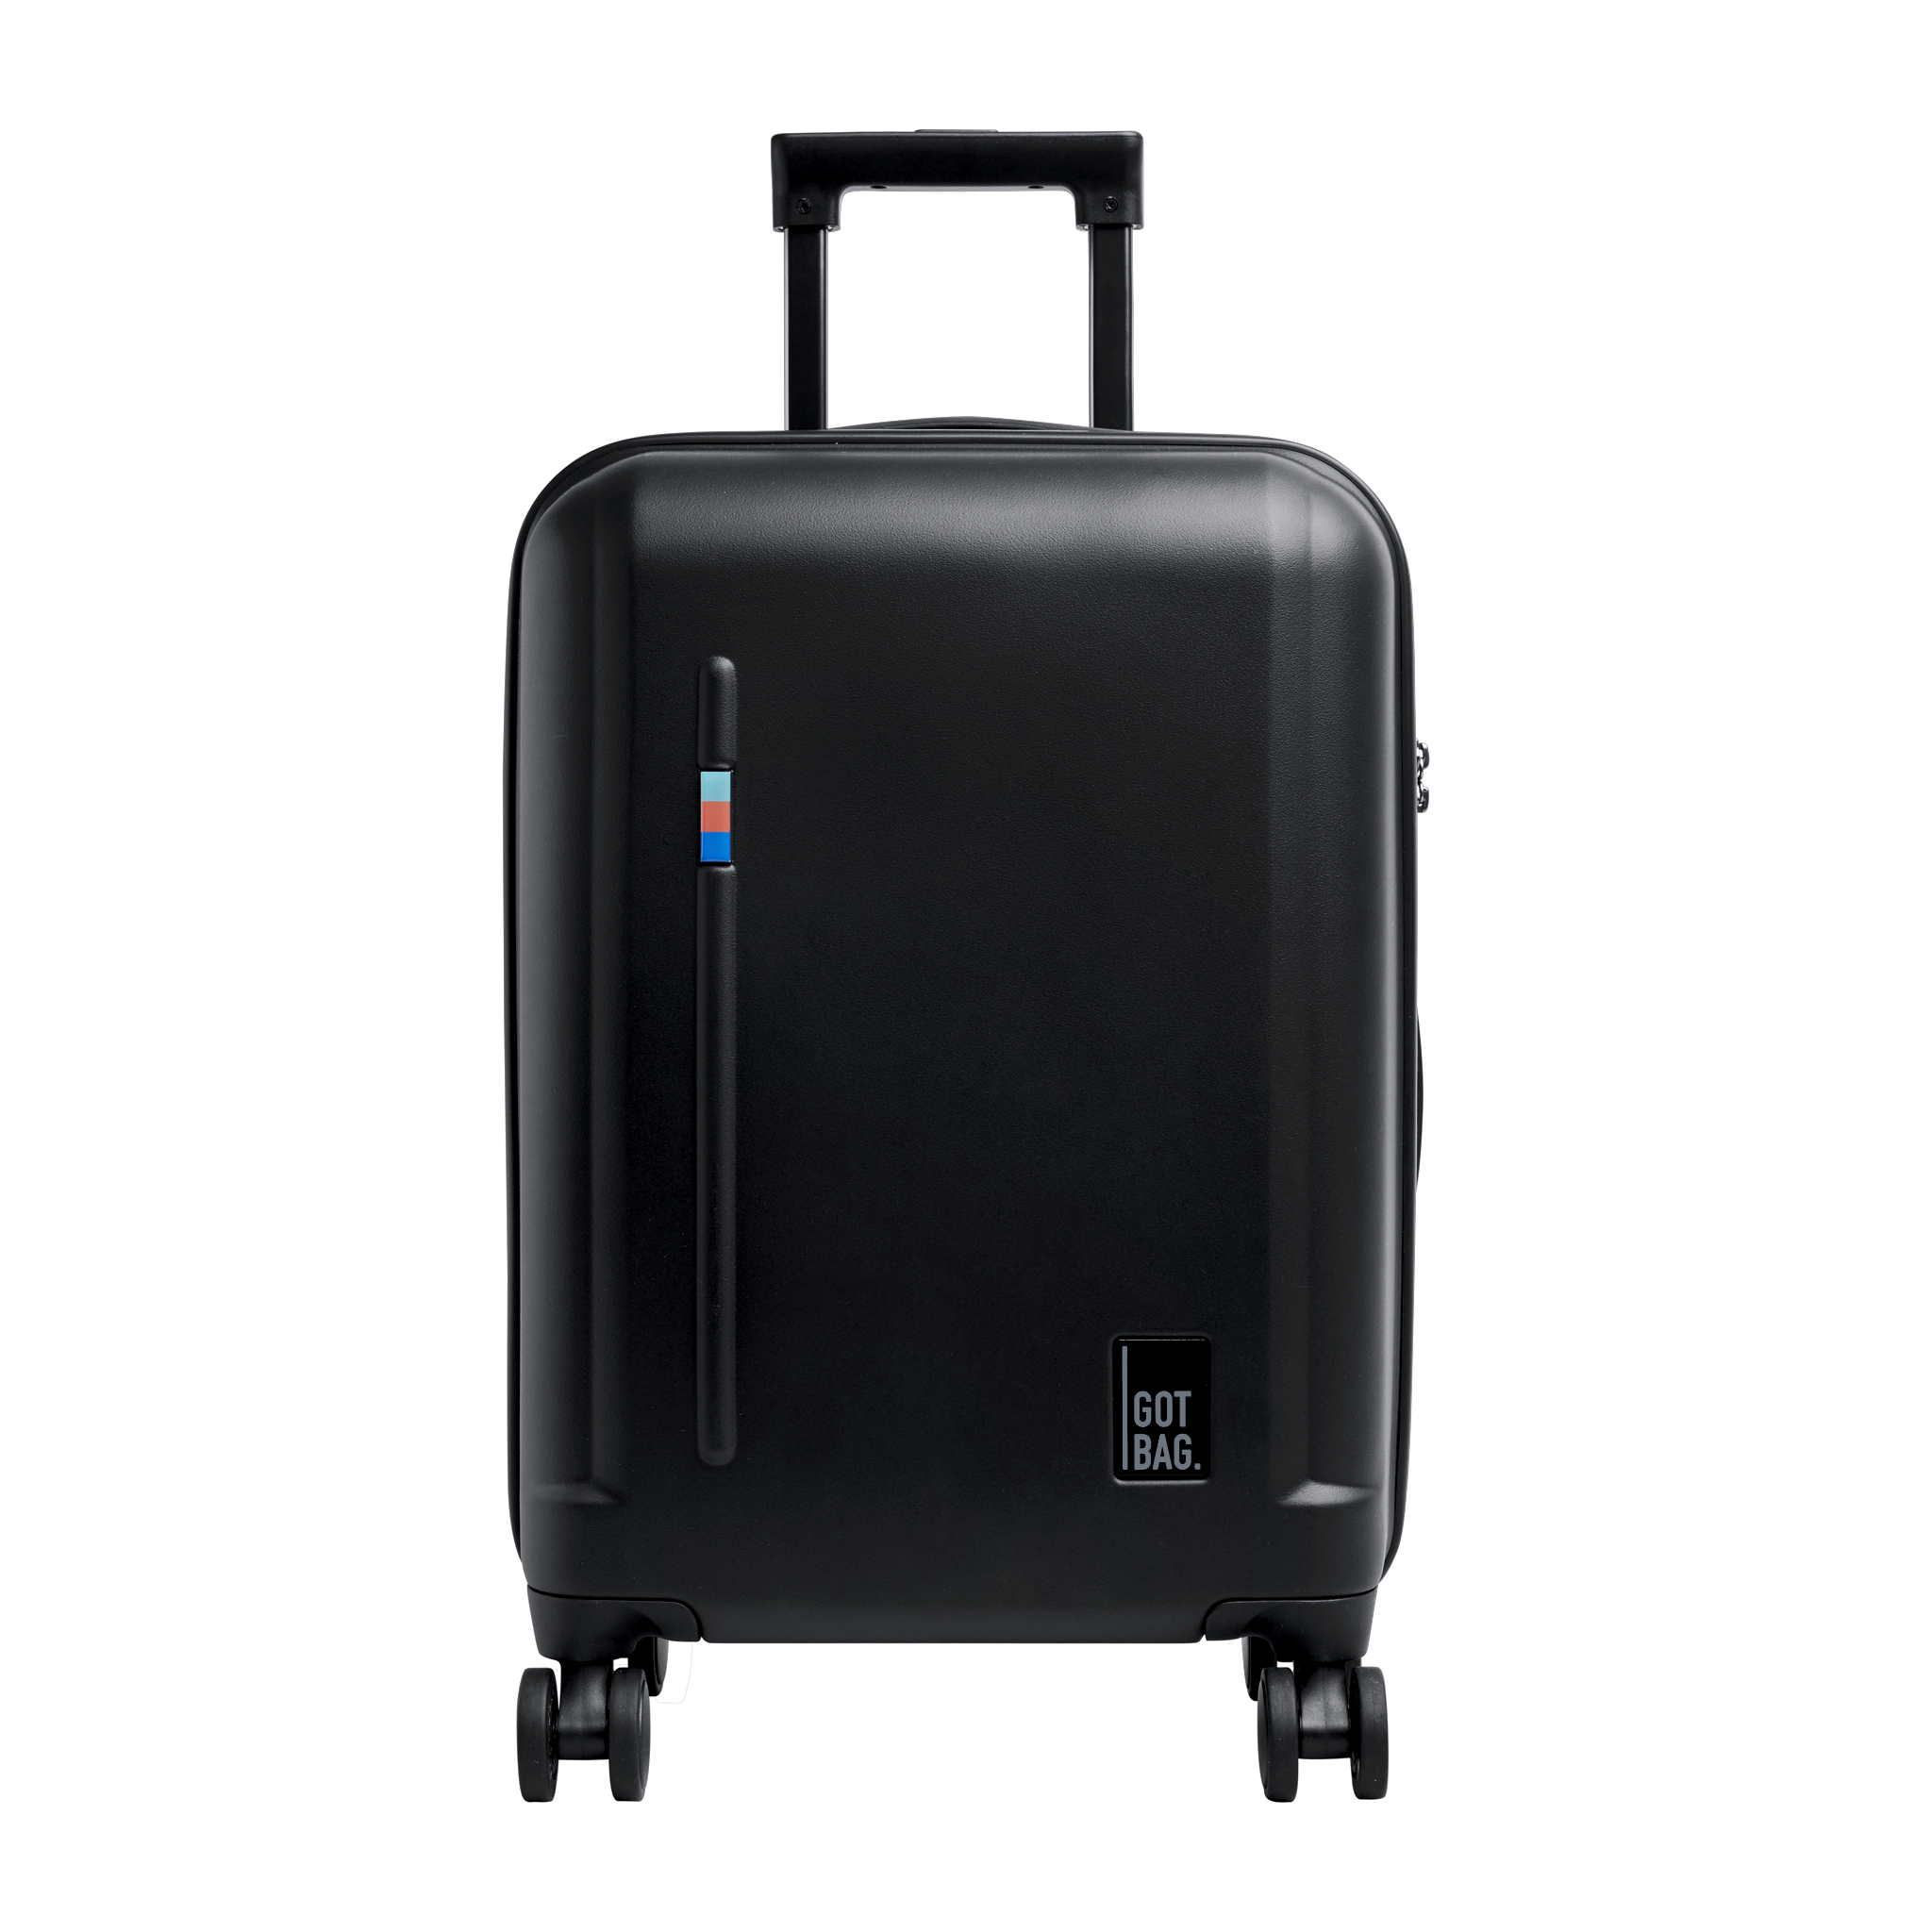 RE:SHELL® CABIN LUGGAGE